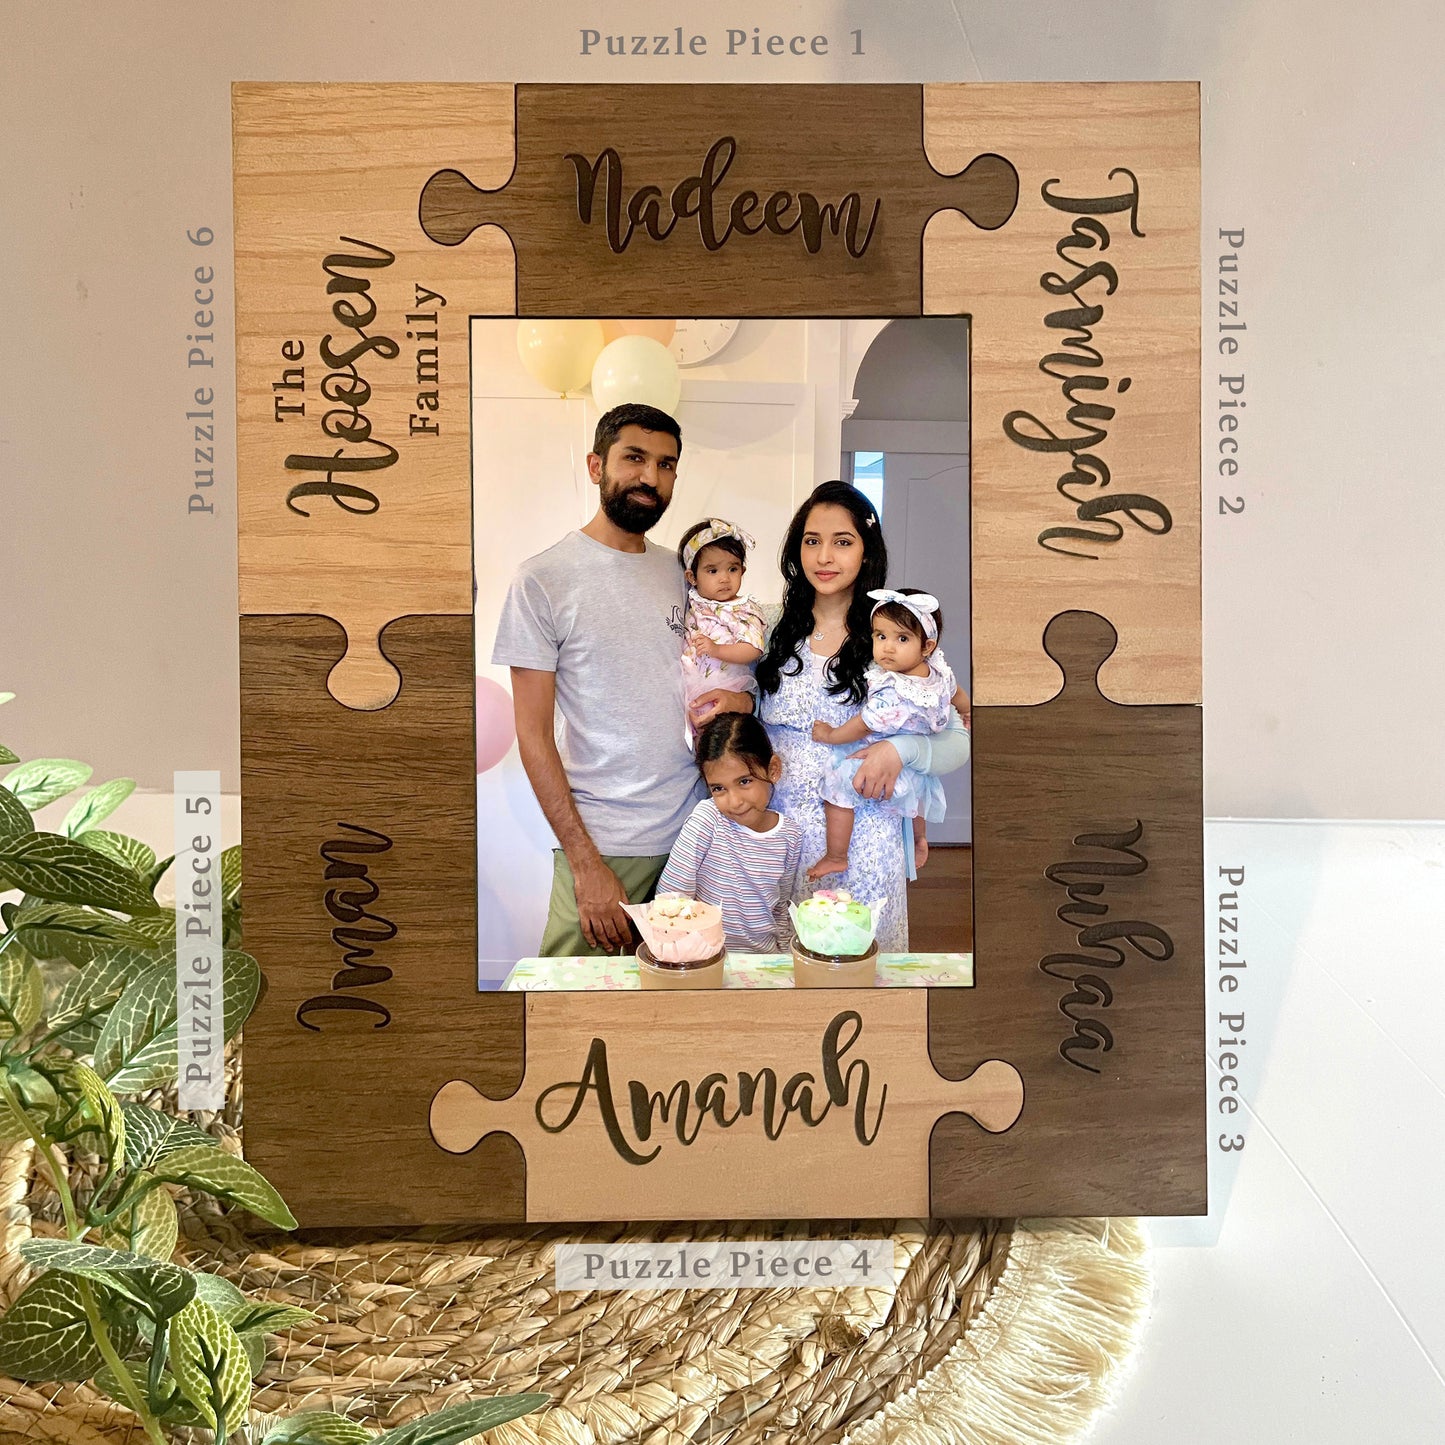 Personalised Wooden Engraved Plaque